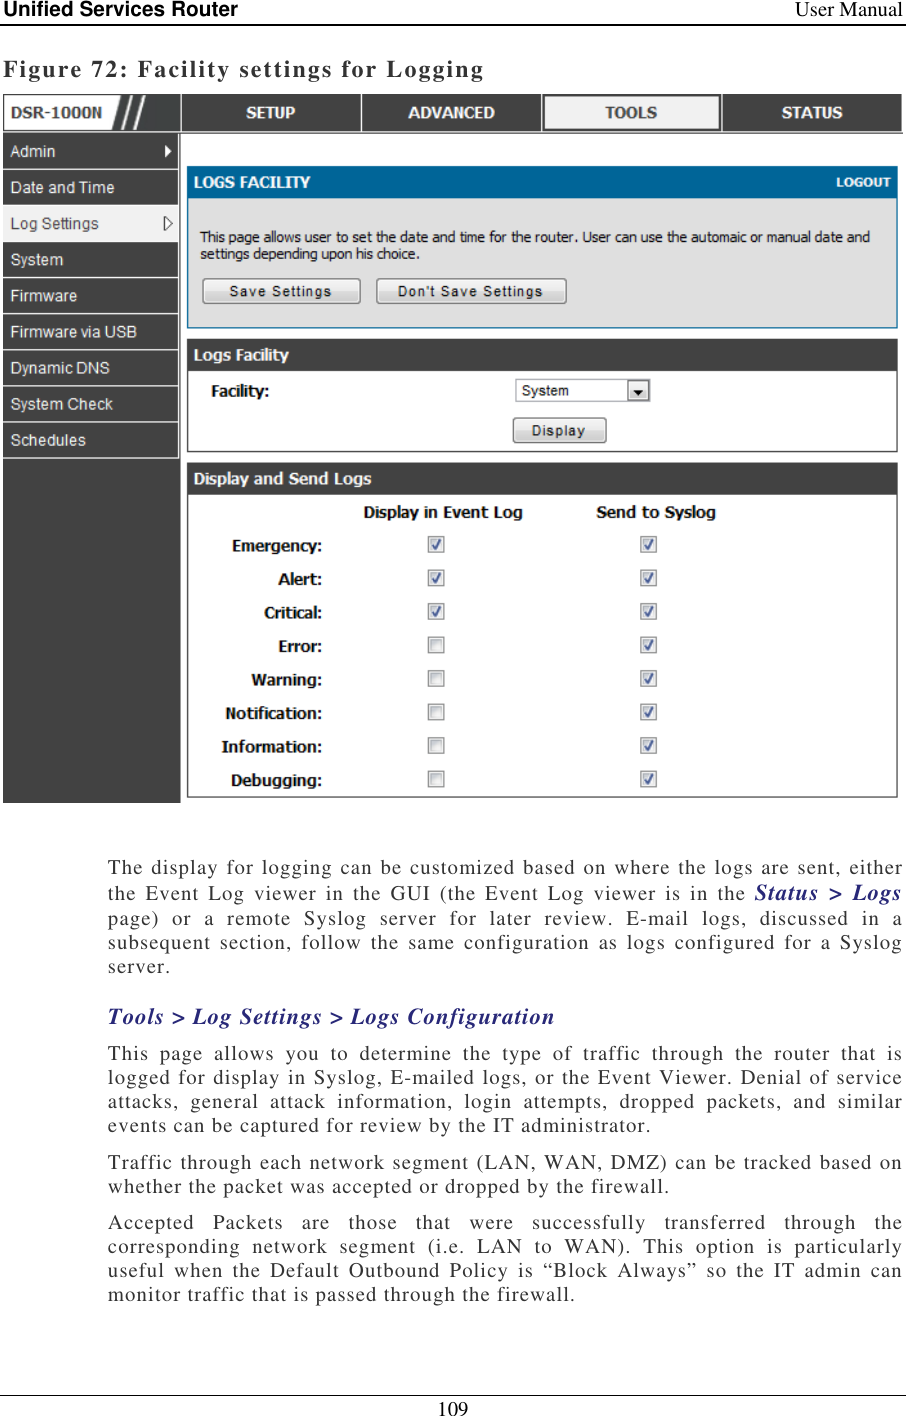 Unified Services Router    User Manual 109  Figure 72: Facility settings for Logging   The display for logging can be customized based on where the logs are sent, either the  Event  Log  viewer  in  the  GUI  (the  Event  Log  viewer  is  in  the  Status  &gt;  Logs page)  or  a  remote  Syslog  server  for  later  review.  E-mail  logs,  discussed  in  a subsequent  section,  follow  the  same  configuration  as  logs  configured  for  a  Syslog server. Tools &gt; Log Settings &gt; Logs Configuration This  page  allows  you  to  determine  the  type  of  traffic  through  the  router  that  is logged for display in Syslog, E-mailed logs, or the Event Viewer. Denial of service attacks,  general  attack  information,  login  attempts,  dropped  packets,  and  similar events can be captured for review by the IT administrator.  Traffic through each network segment (LAN, WAN, DMZ) can be tracked based on whether the packet was accepted or dropped by the firewall.  Accepted  Packets  are  those  that  were  successfully  transferred  through  the corresponding  network  segment  (i.e.  LAN  to  WAN).  This  option  is  particularly useful  when  the  Default  Outbound  Policy  is  “Block  Always”  so  the  IT  admin  can monitor traffic that is passed through the firewall.  